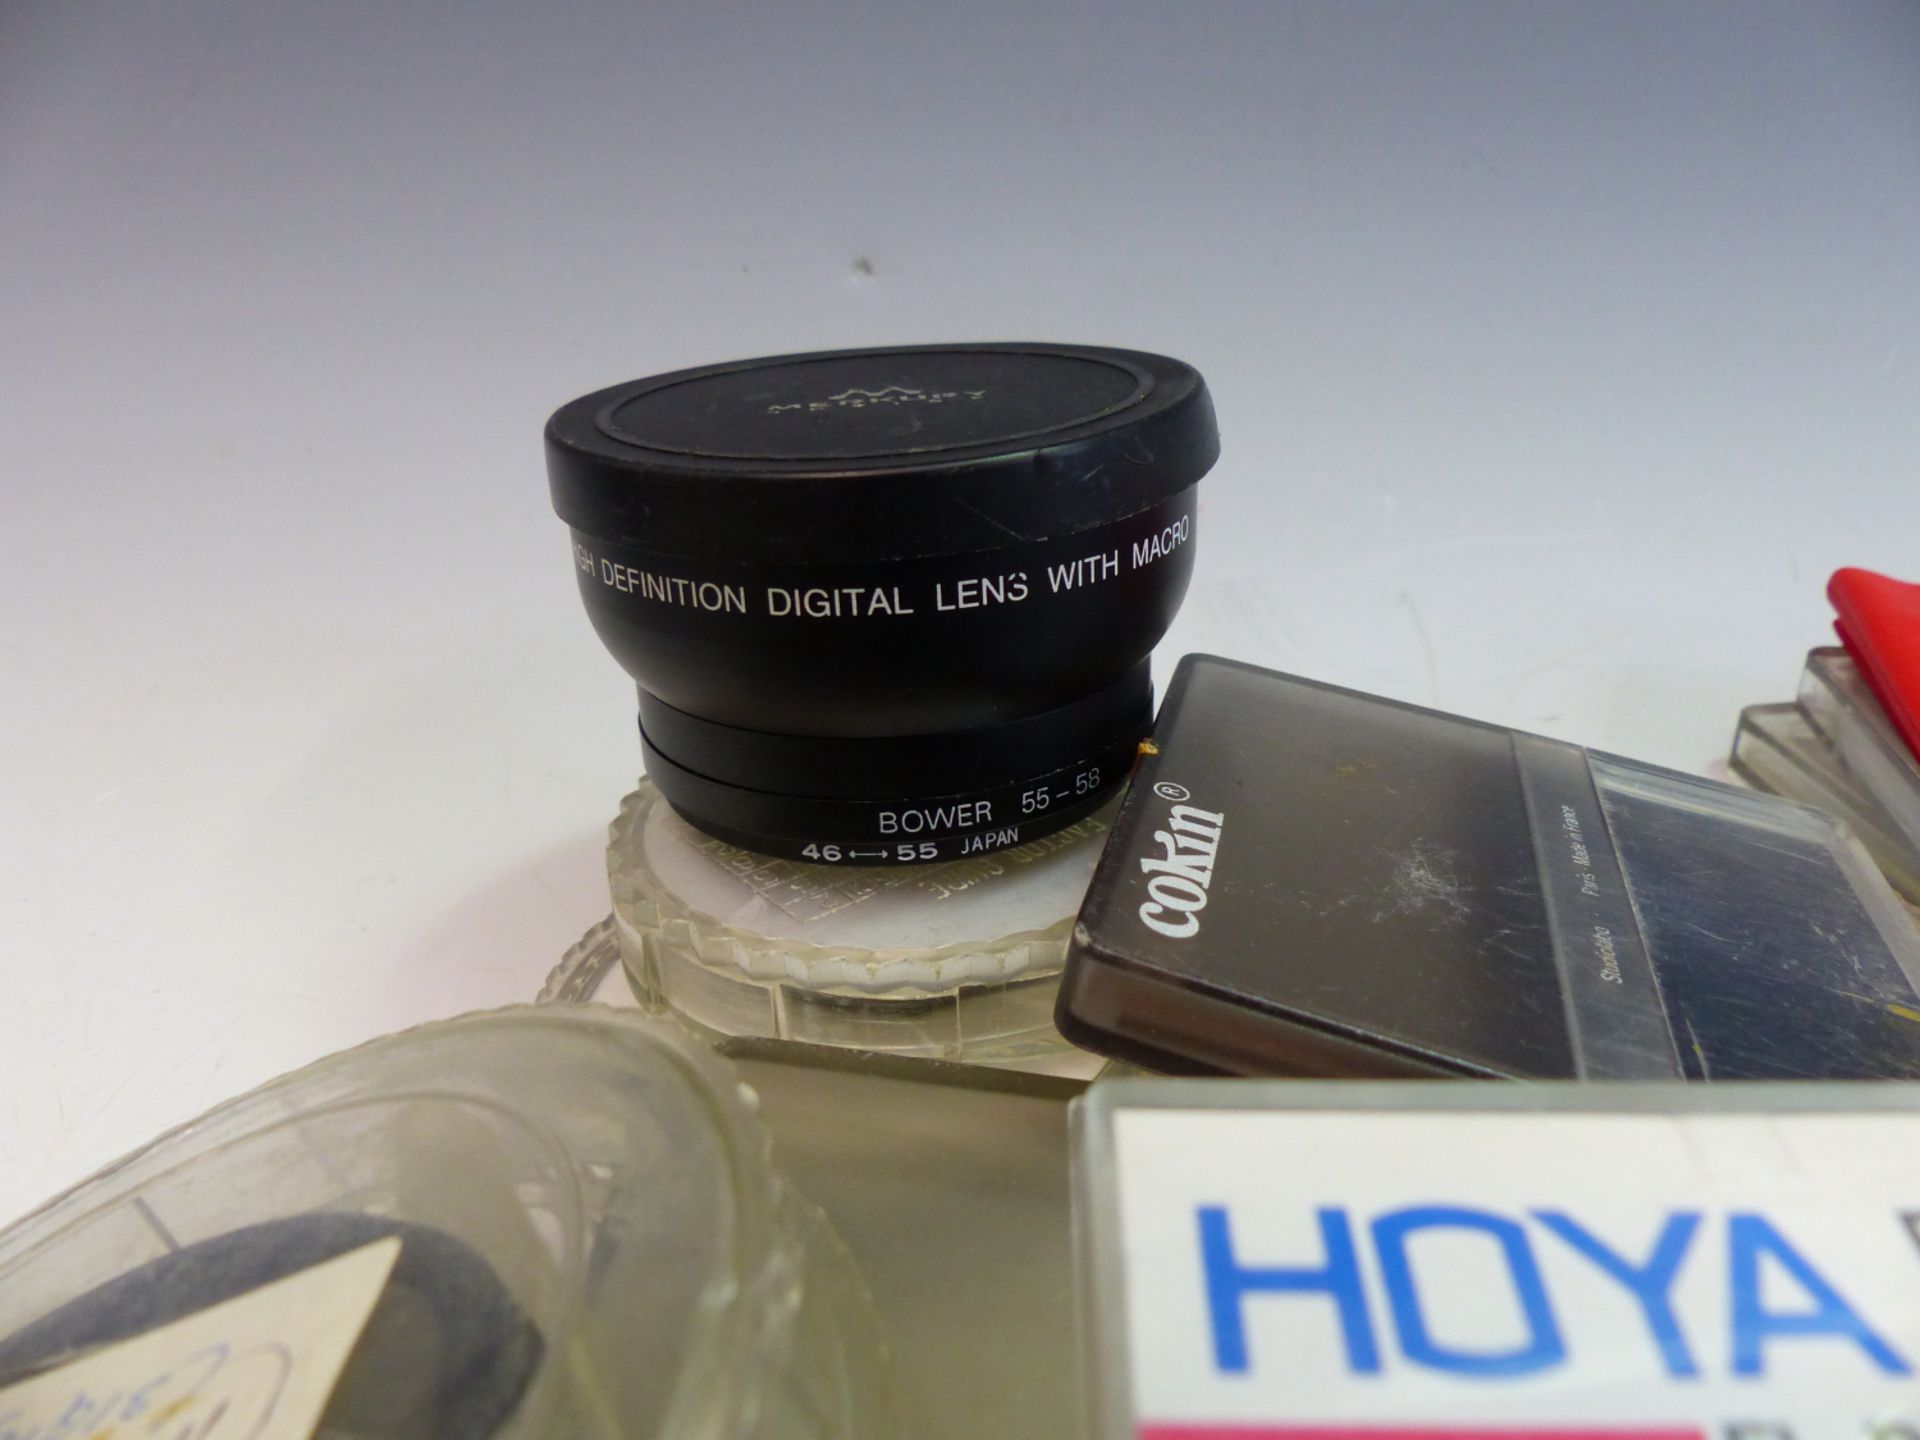 COKIN, HOYA AND OTHER CAMERA FILTERS AND DIFFUSERS A 72MM POLARISER, A SUNPAK AUTO 300 FLASH UNIT, A - Image 2 of 3